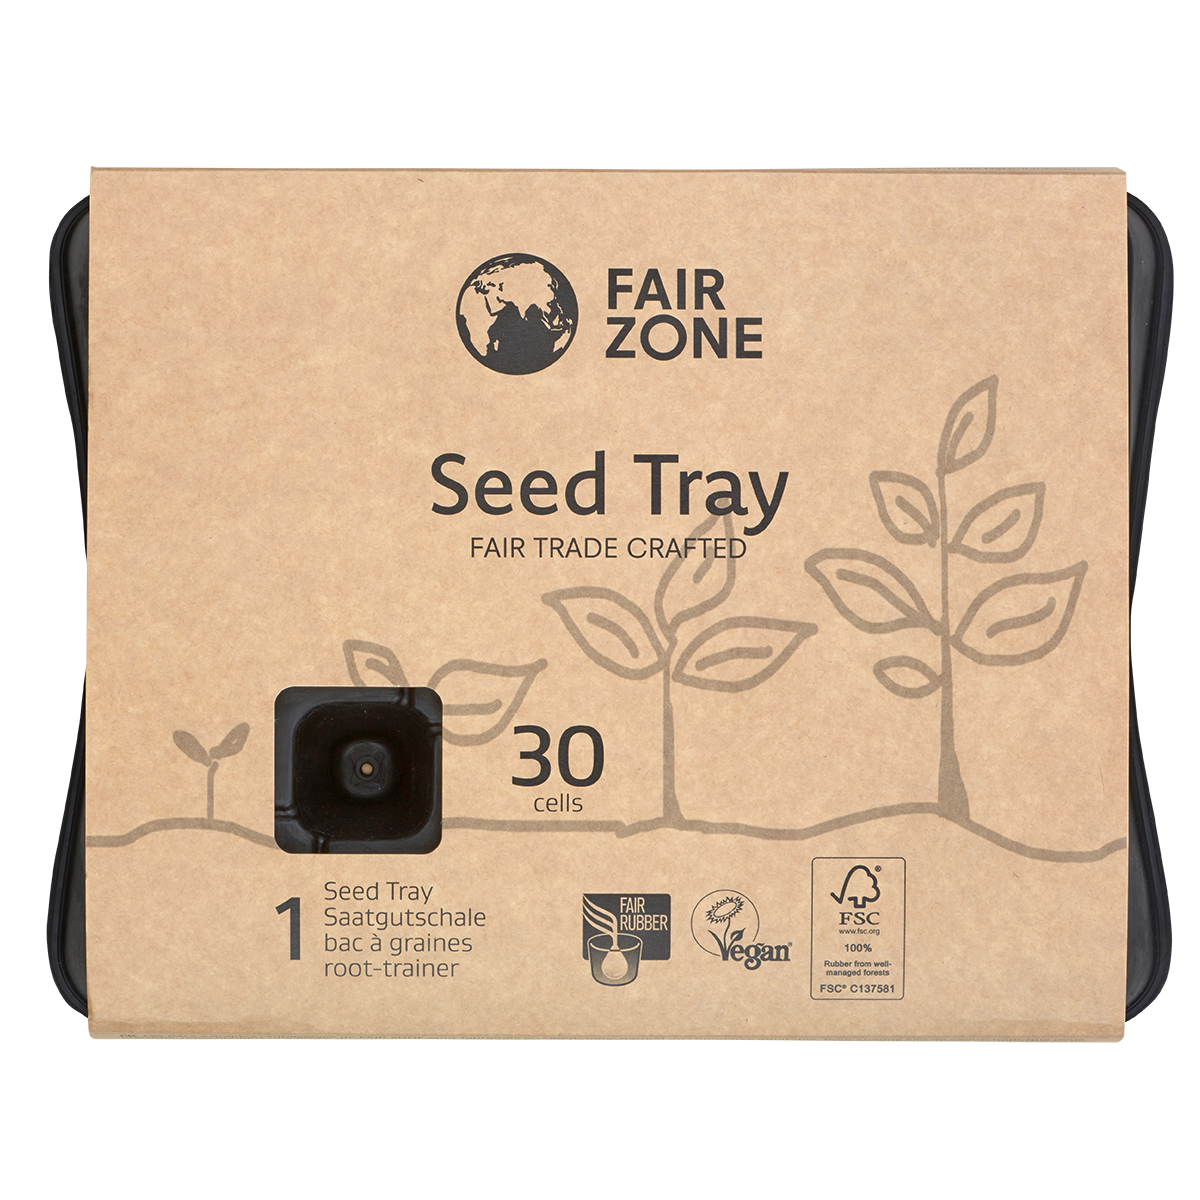 Seed Tray verpackt